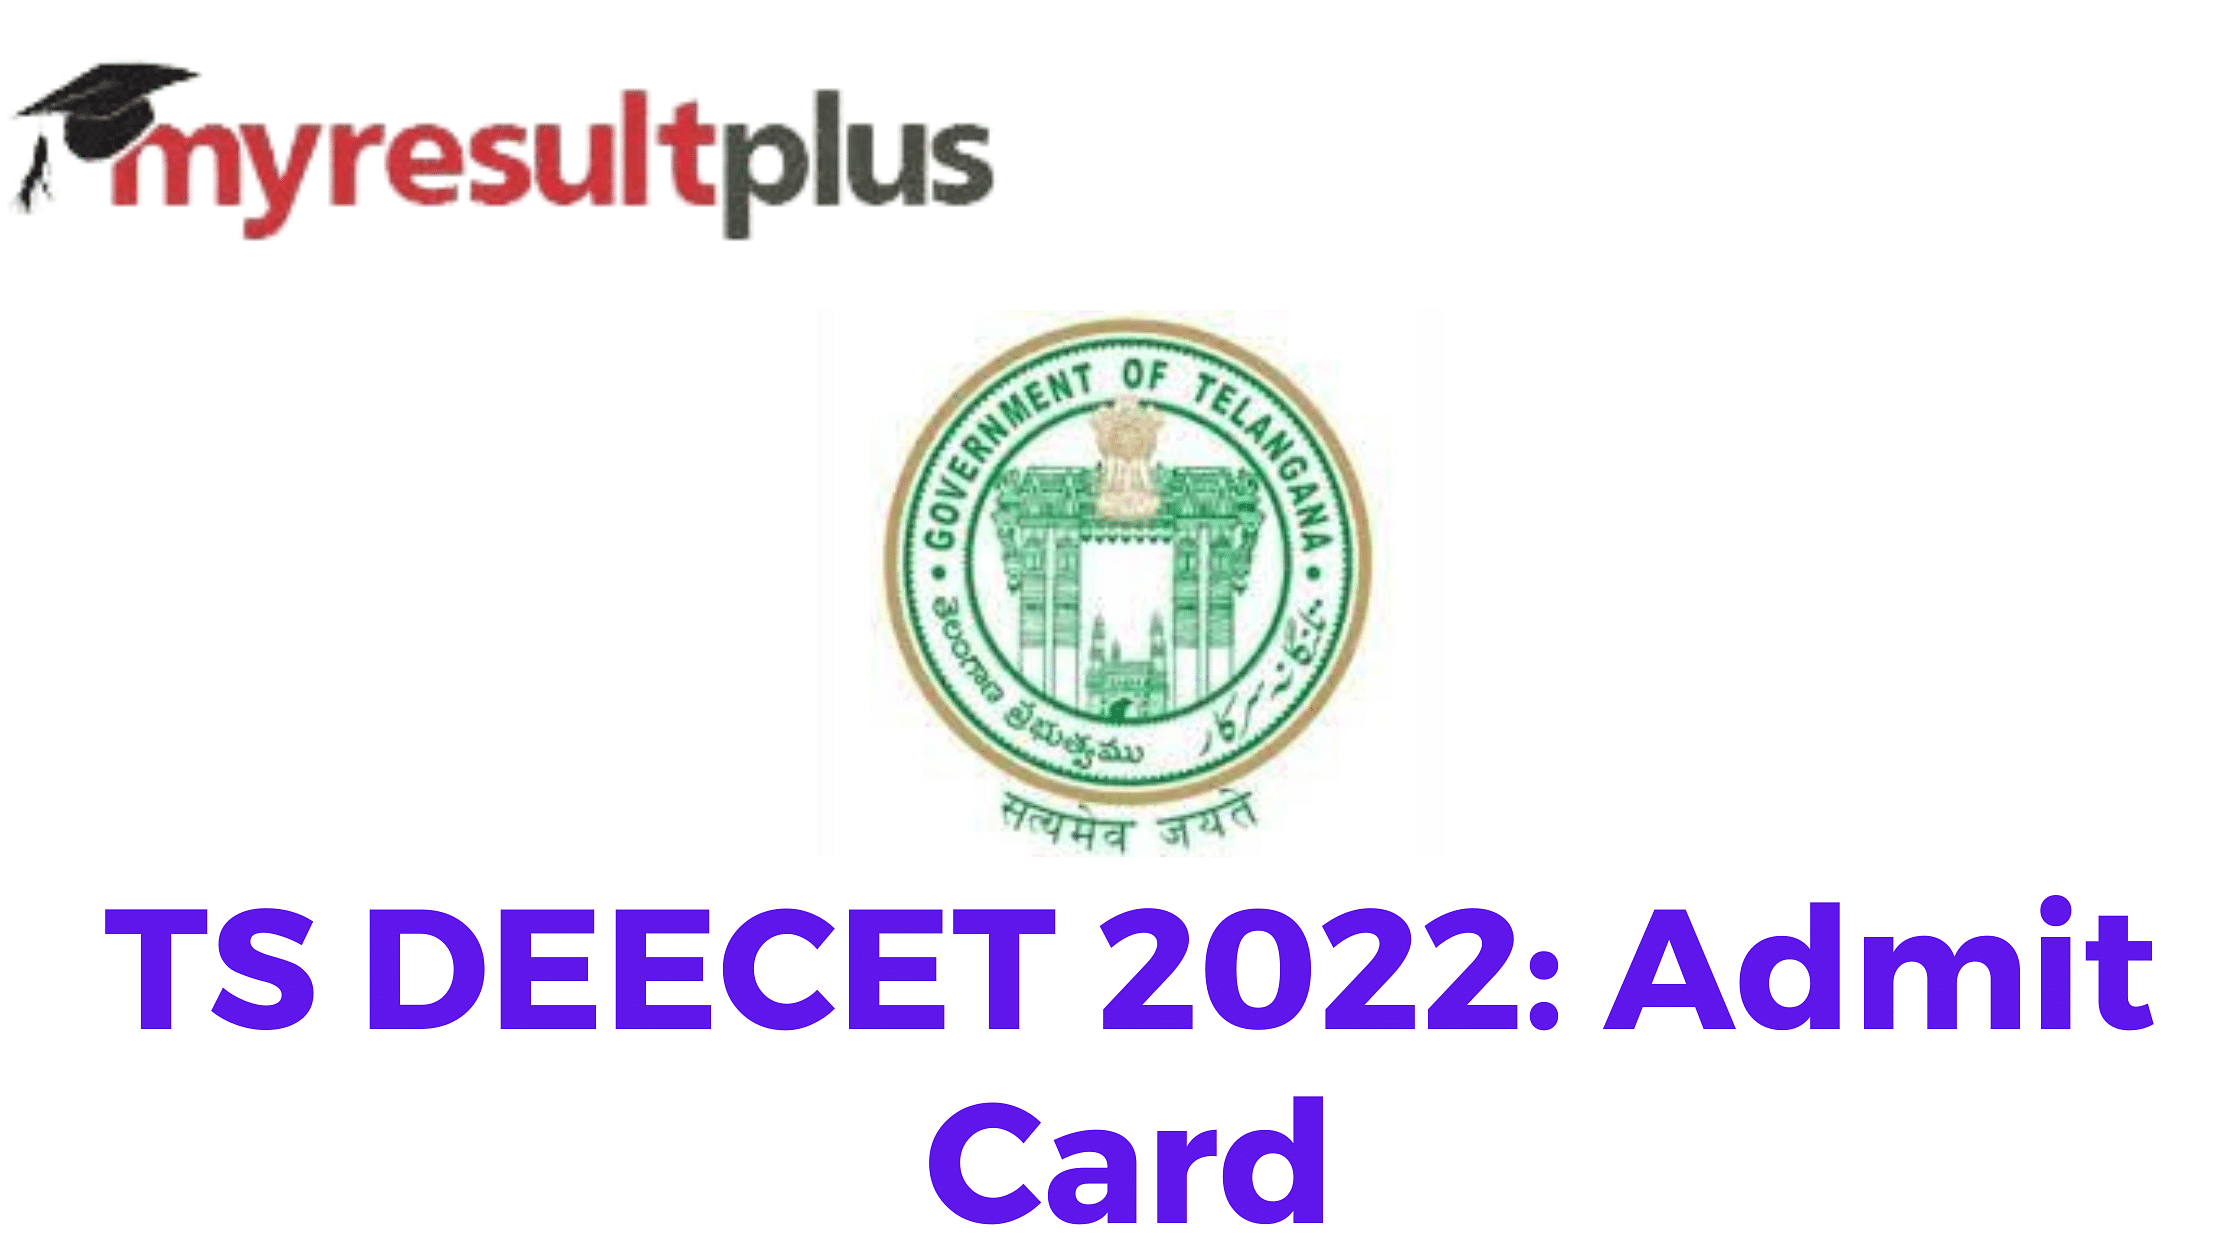 TS DEECET Hall Ticket 2022 Available for Download, Direct Link to Download Here